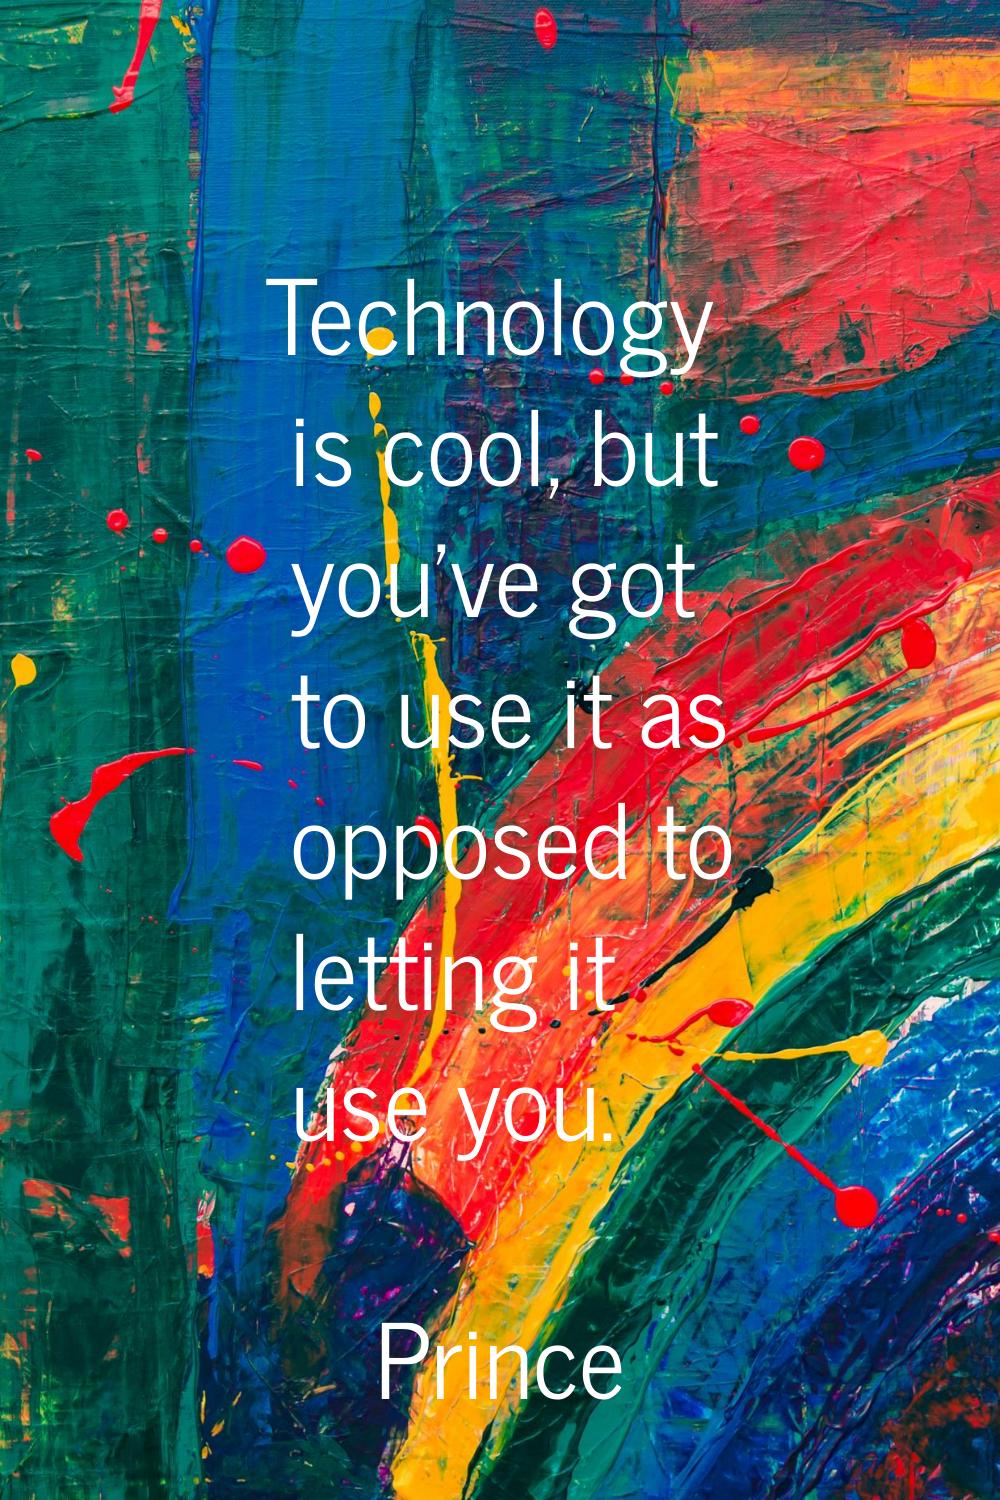 Technology is cool, but you've got to use it as opposed to letting it use you.